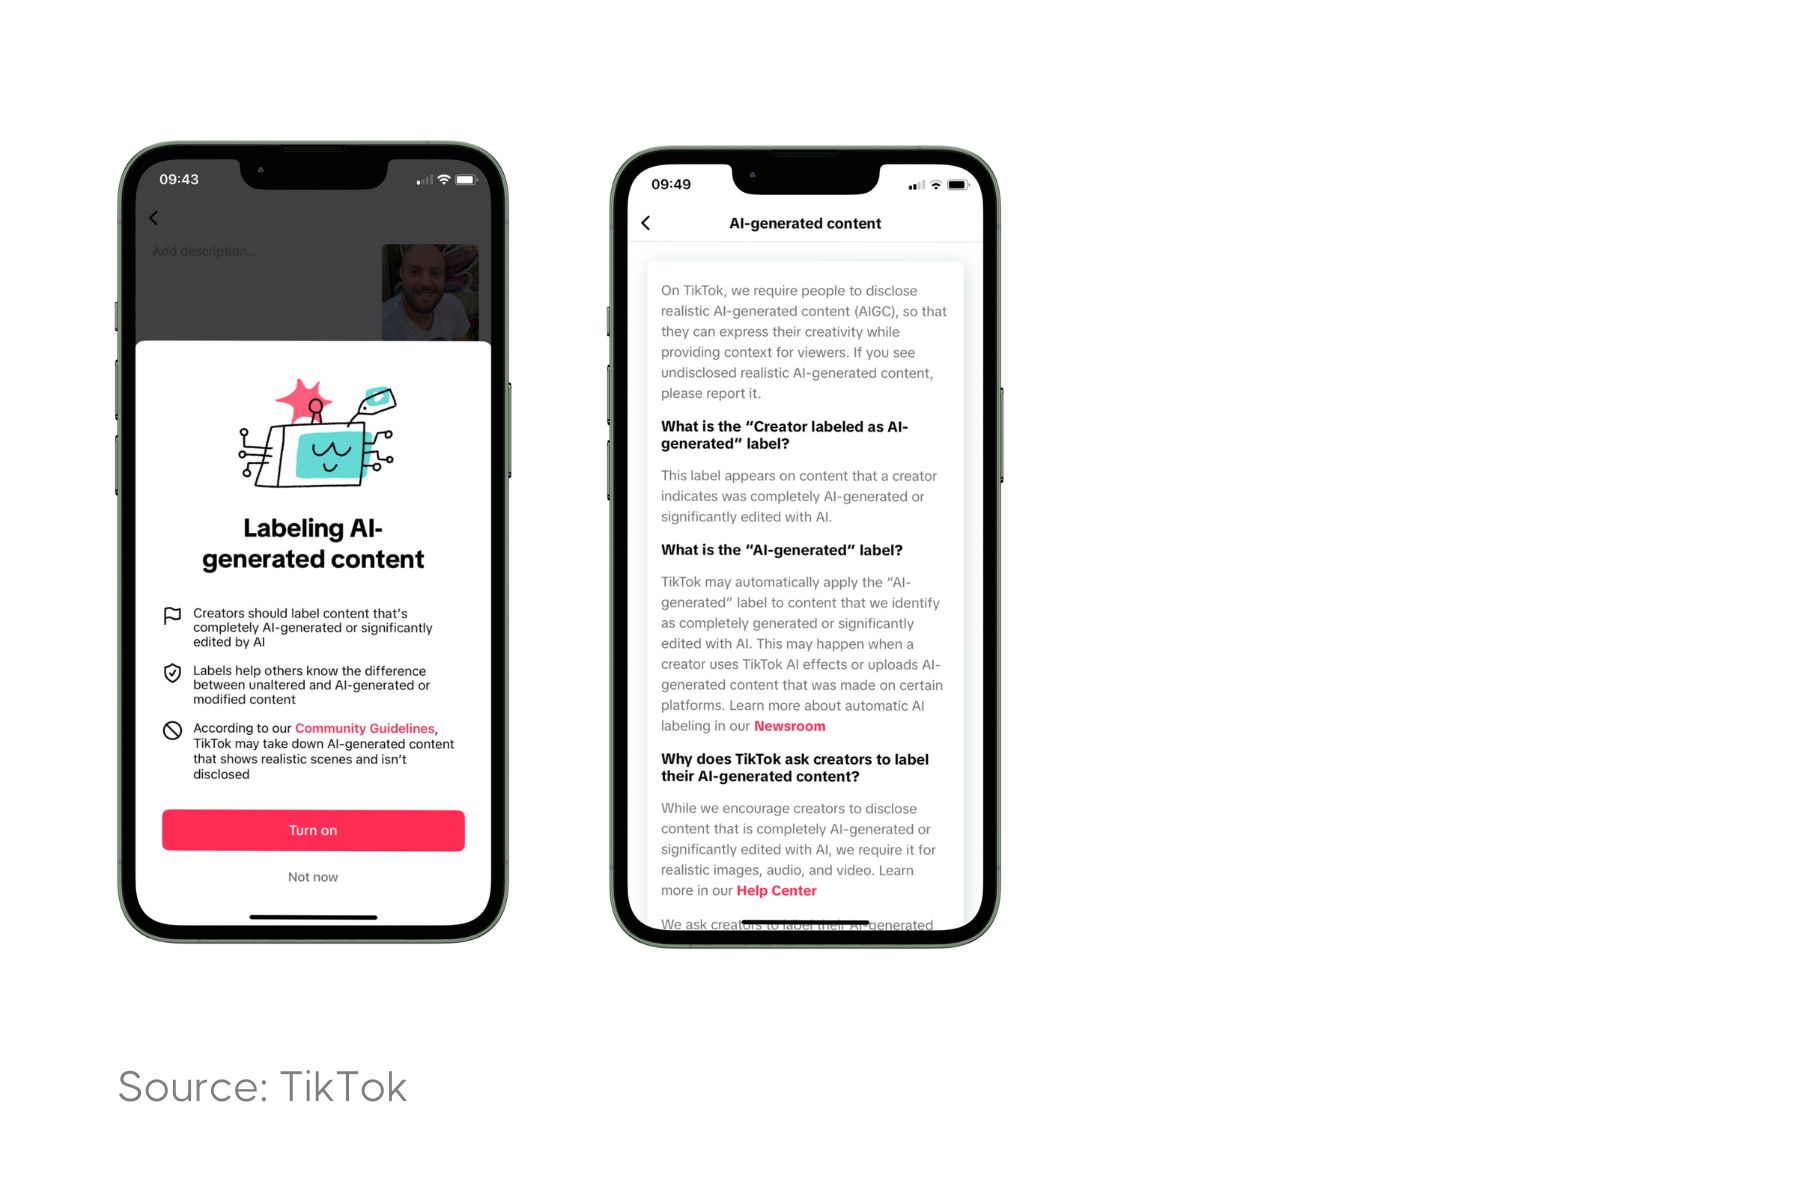 Two smartphones displaying TikTok's new feature on AI-generated content. The left phone shows a graphic of a smiling book with a star, titled 'Labeling AI-generated content', highlighting options to label content as AI-generated. The right phone displays an FAQ section explaining the importance of this feature, such as differentiating unaltered and AI-modified content. Both screens emphasize the necessity of transparency in AI-generated content, with a footnote citing TikTok as the source.